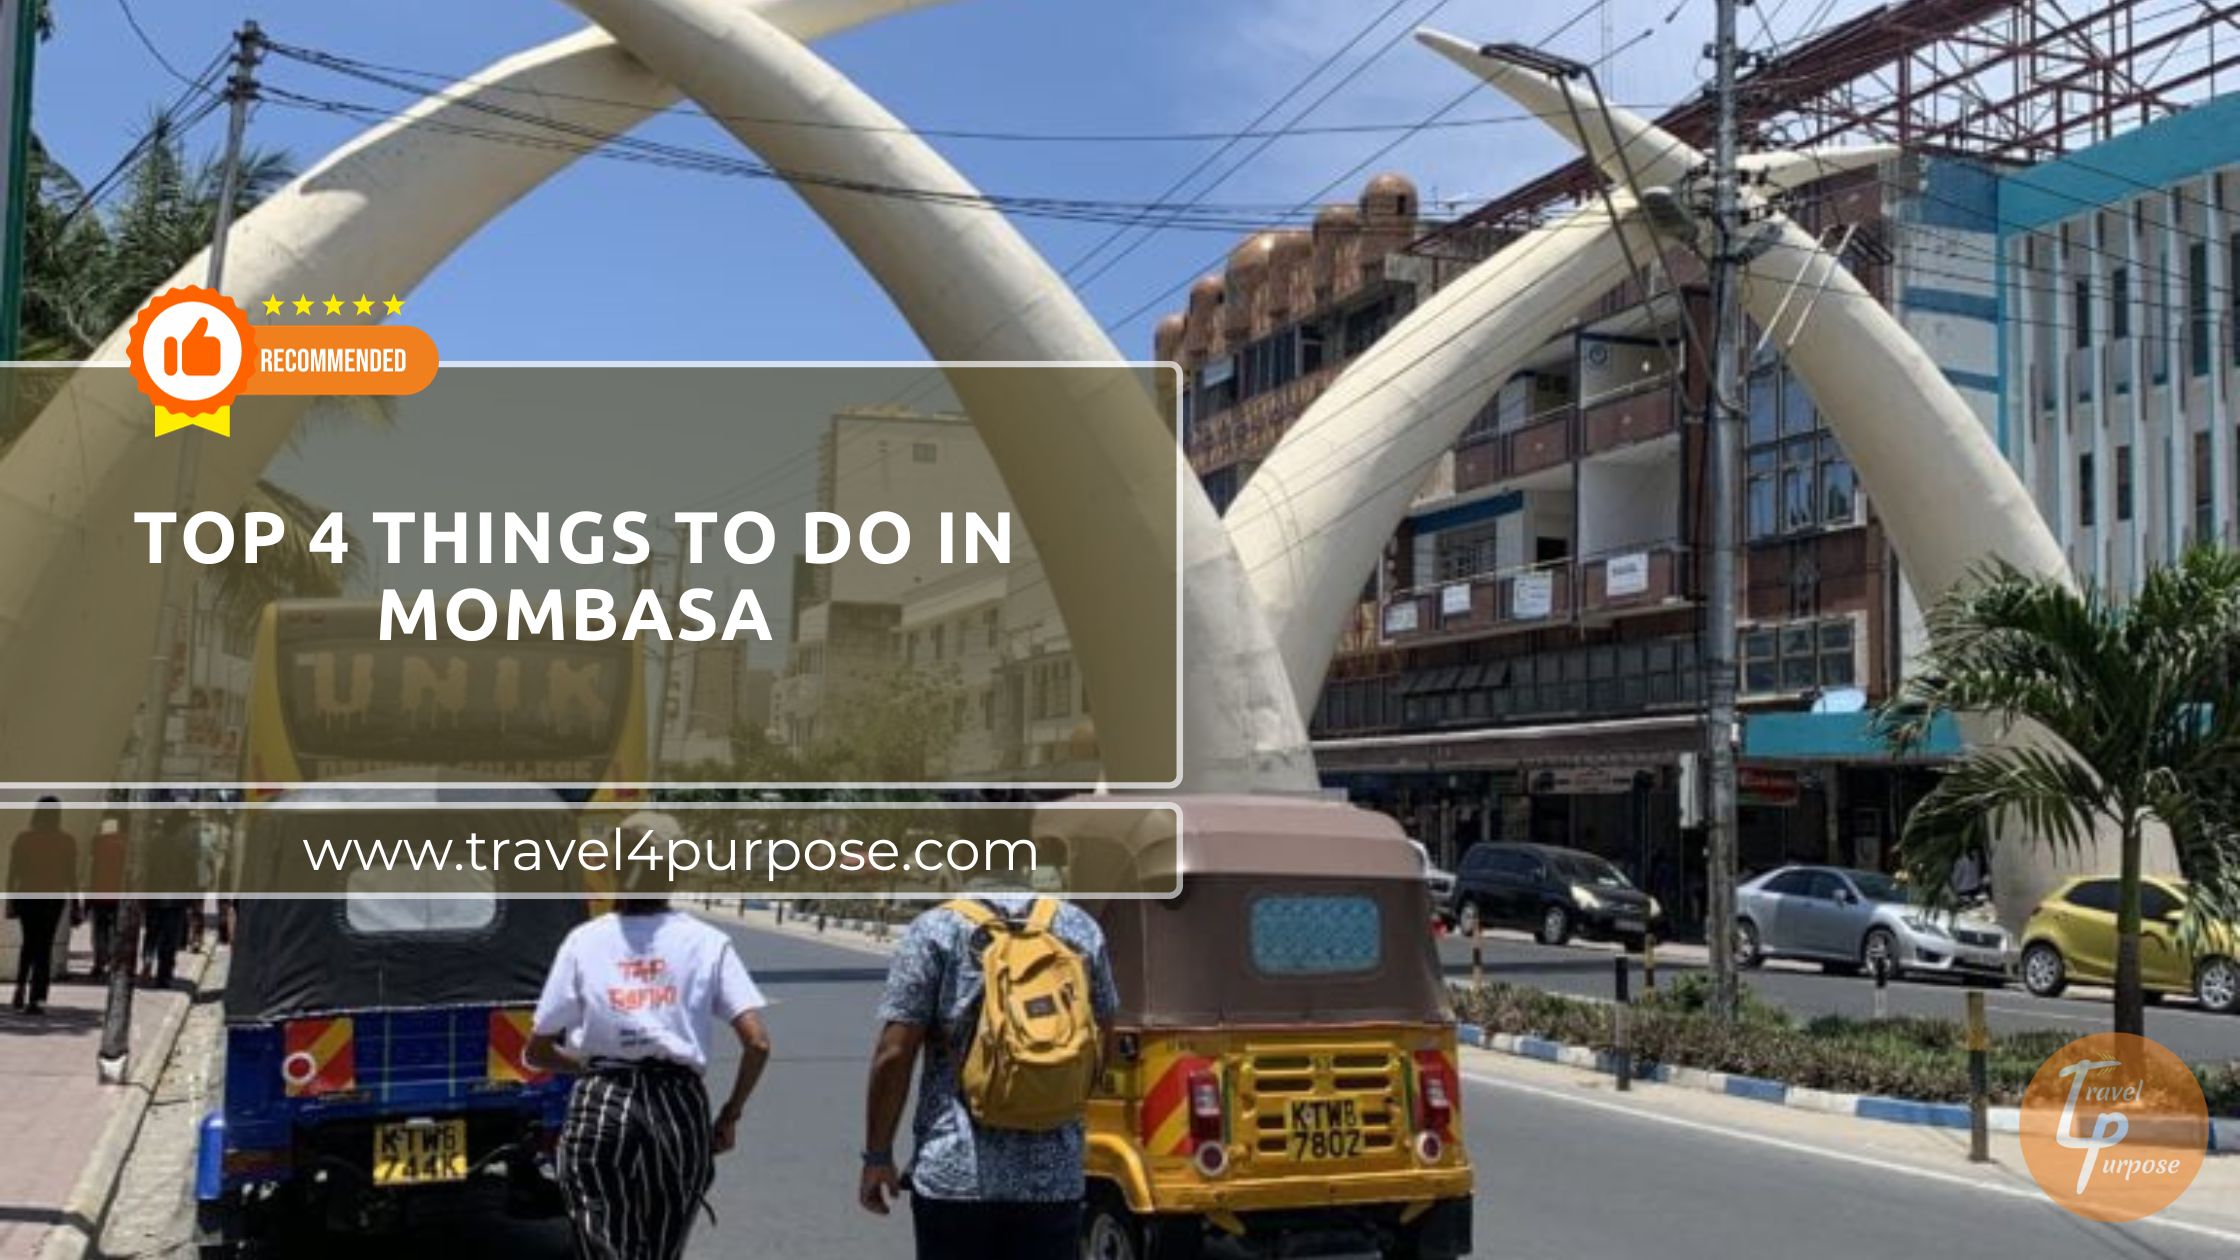 Top 4 Things to Do in Mombasa - Travel4Purpose